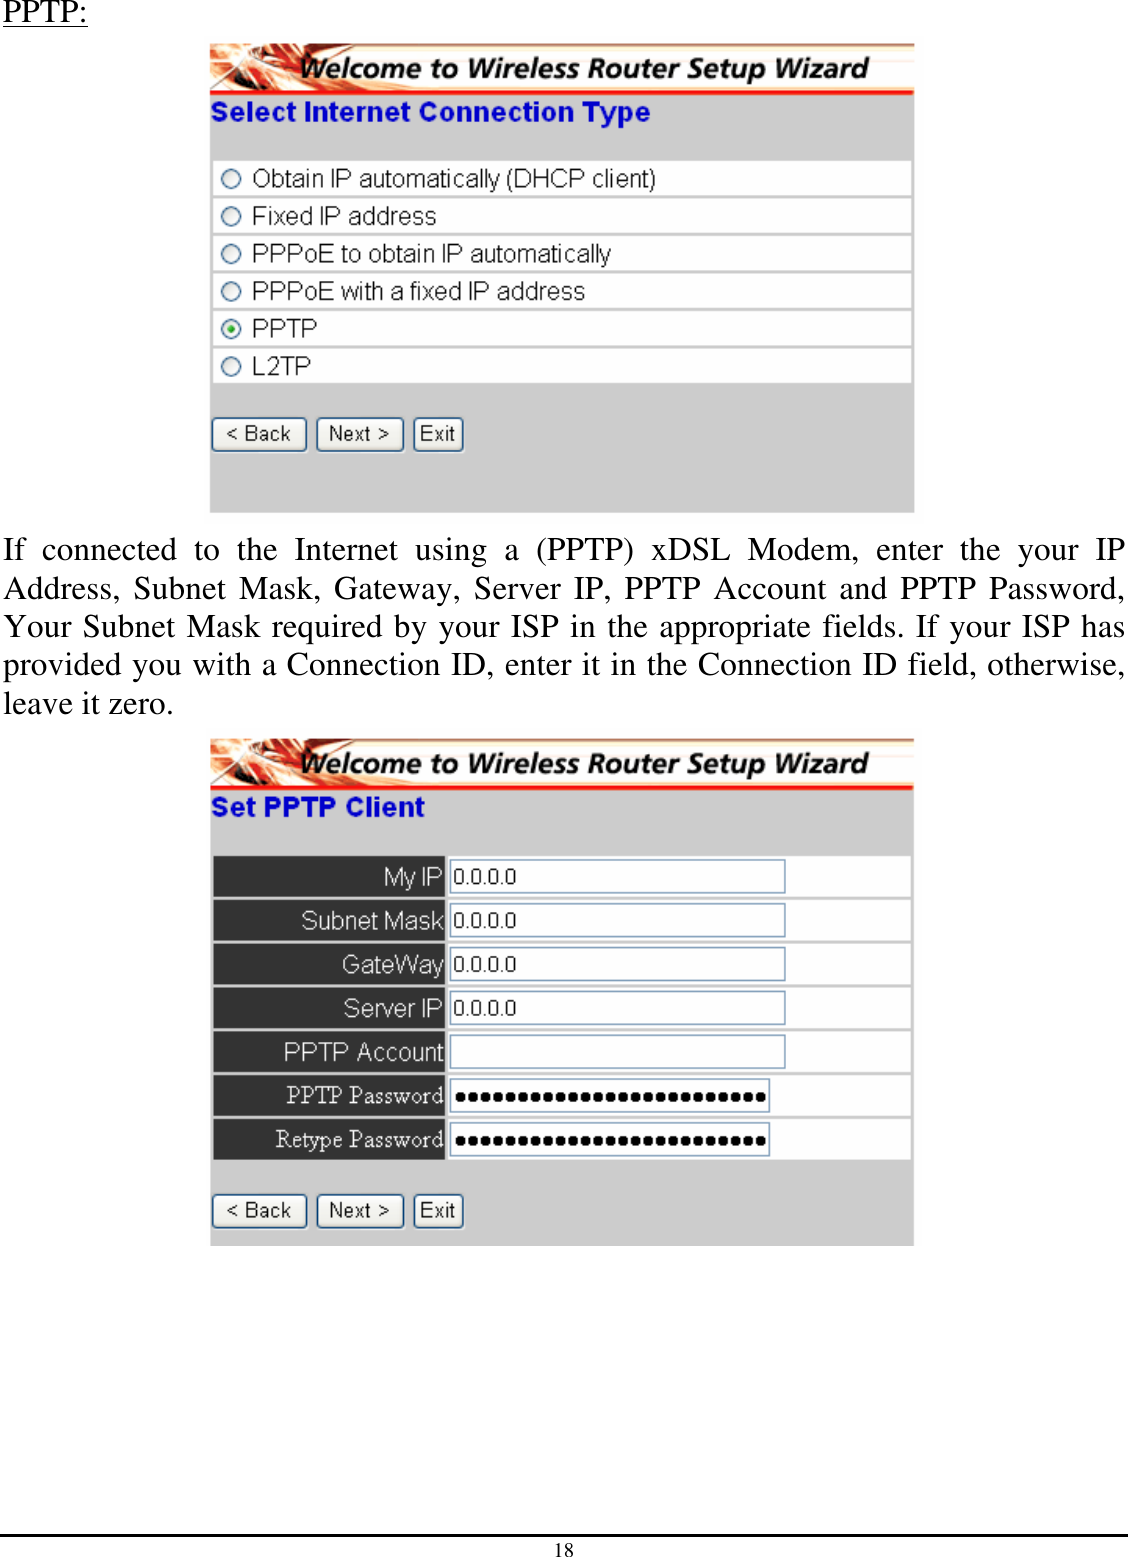 18 PPTP:  If  connected  to  the  Internet  using  a  (PPTP)  xDSL  Modem,  enter  the  your  IP Address, Subnet  Mask, Gateway, Server  IP, PPTP Account and PPTP Password, Your Subnet Mask required by your ISP in the appropriate fields. If your ISP has provided you with a Connection ID, enter it in the Connection ID field, otherwise, leave it zero.    